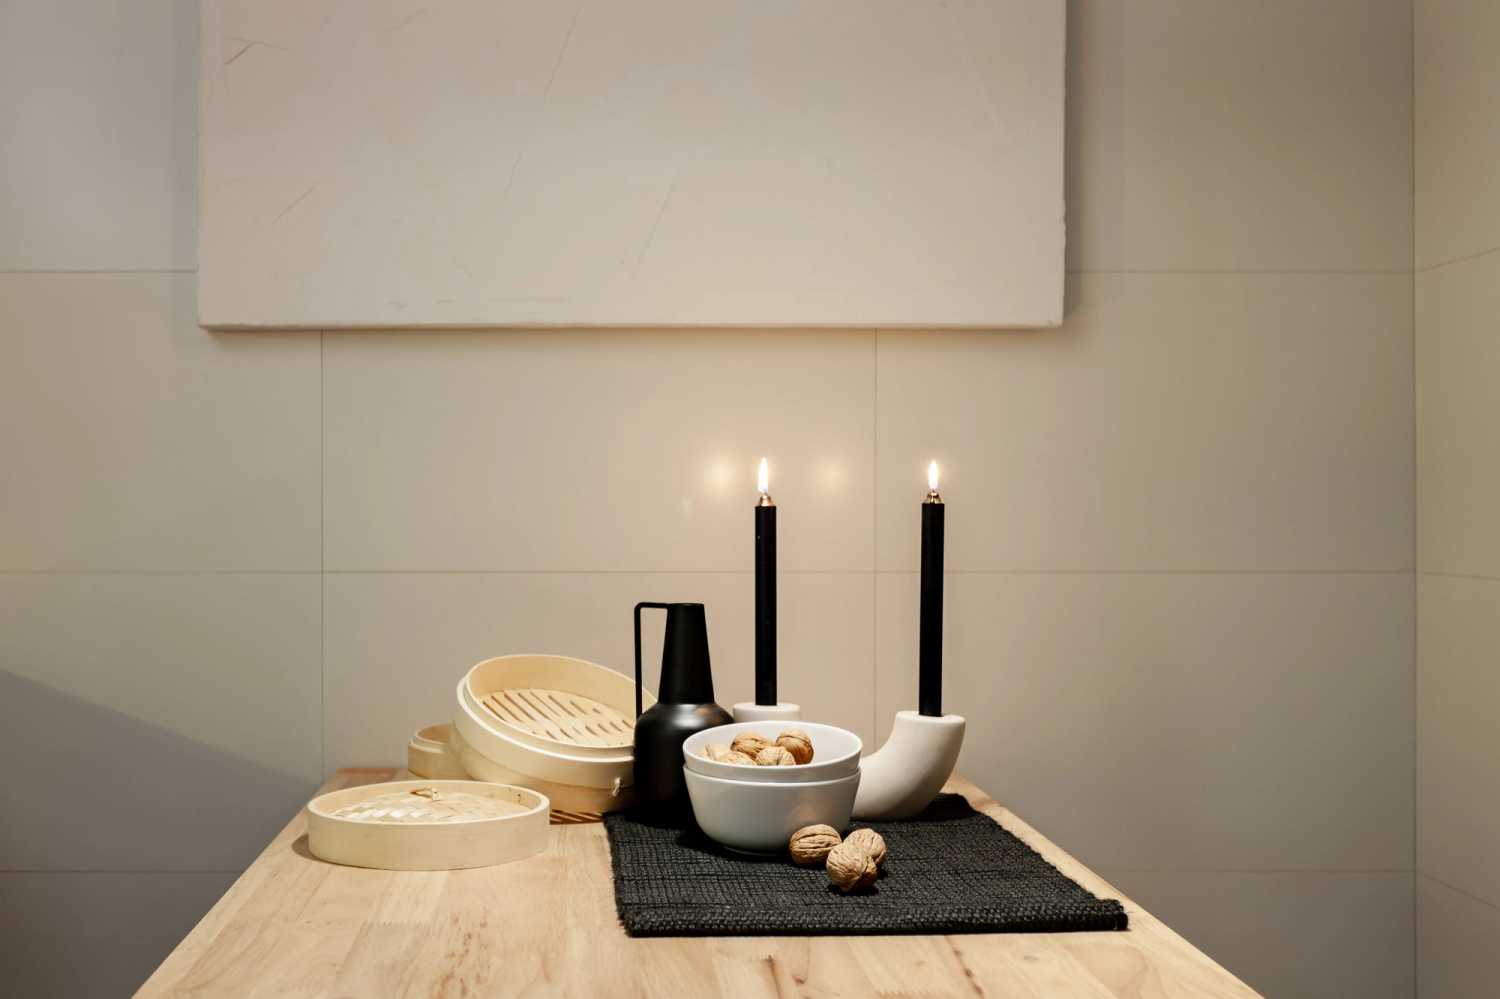 1653912533-ukio-barcelona-diagonal-dining-table-with-candles-and-nuts.jpg